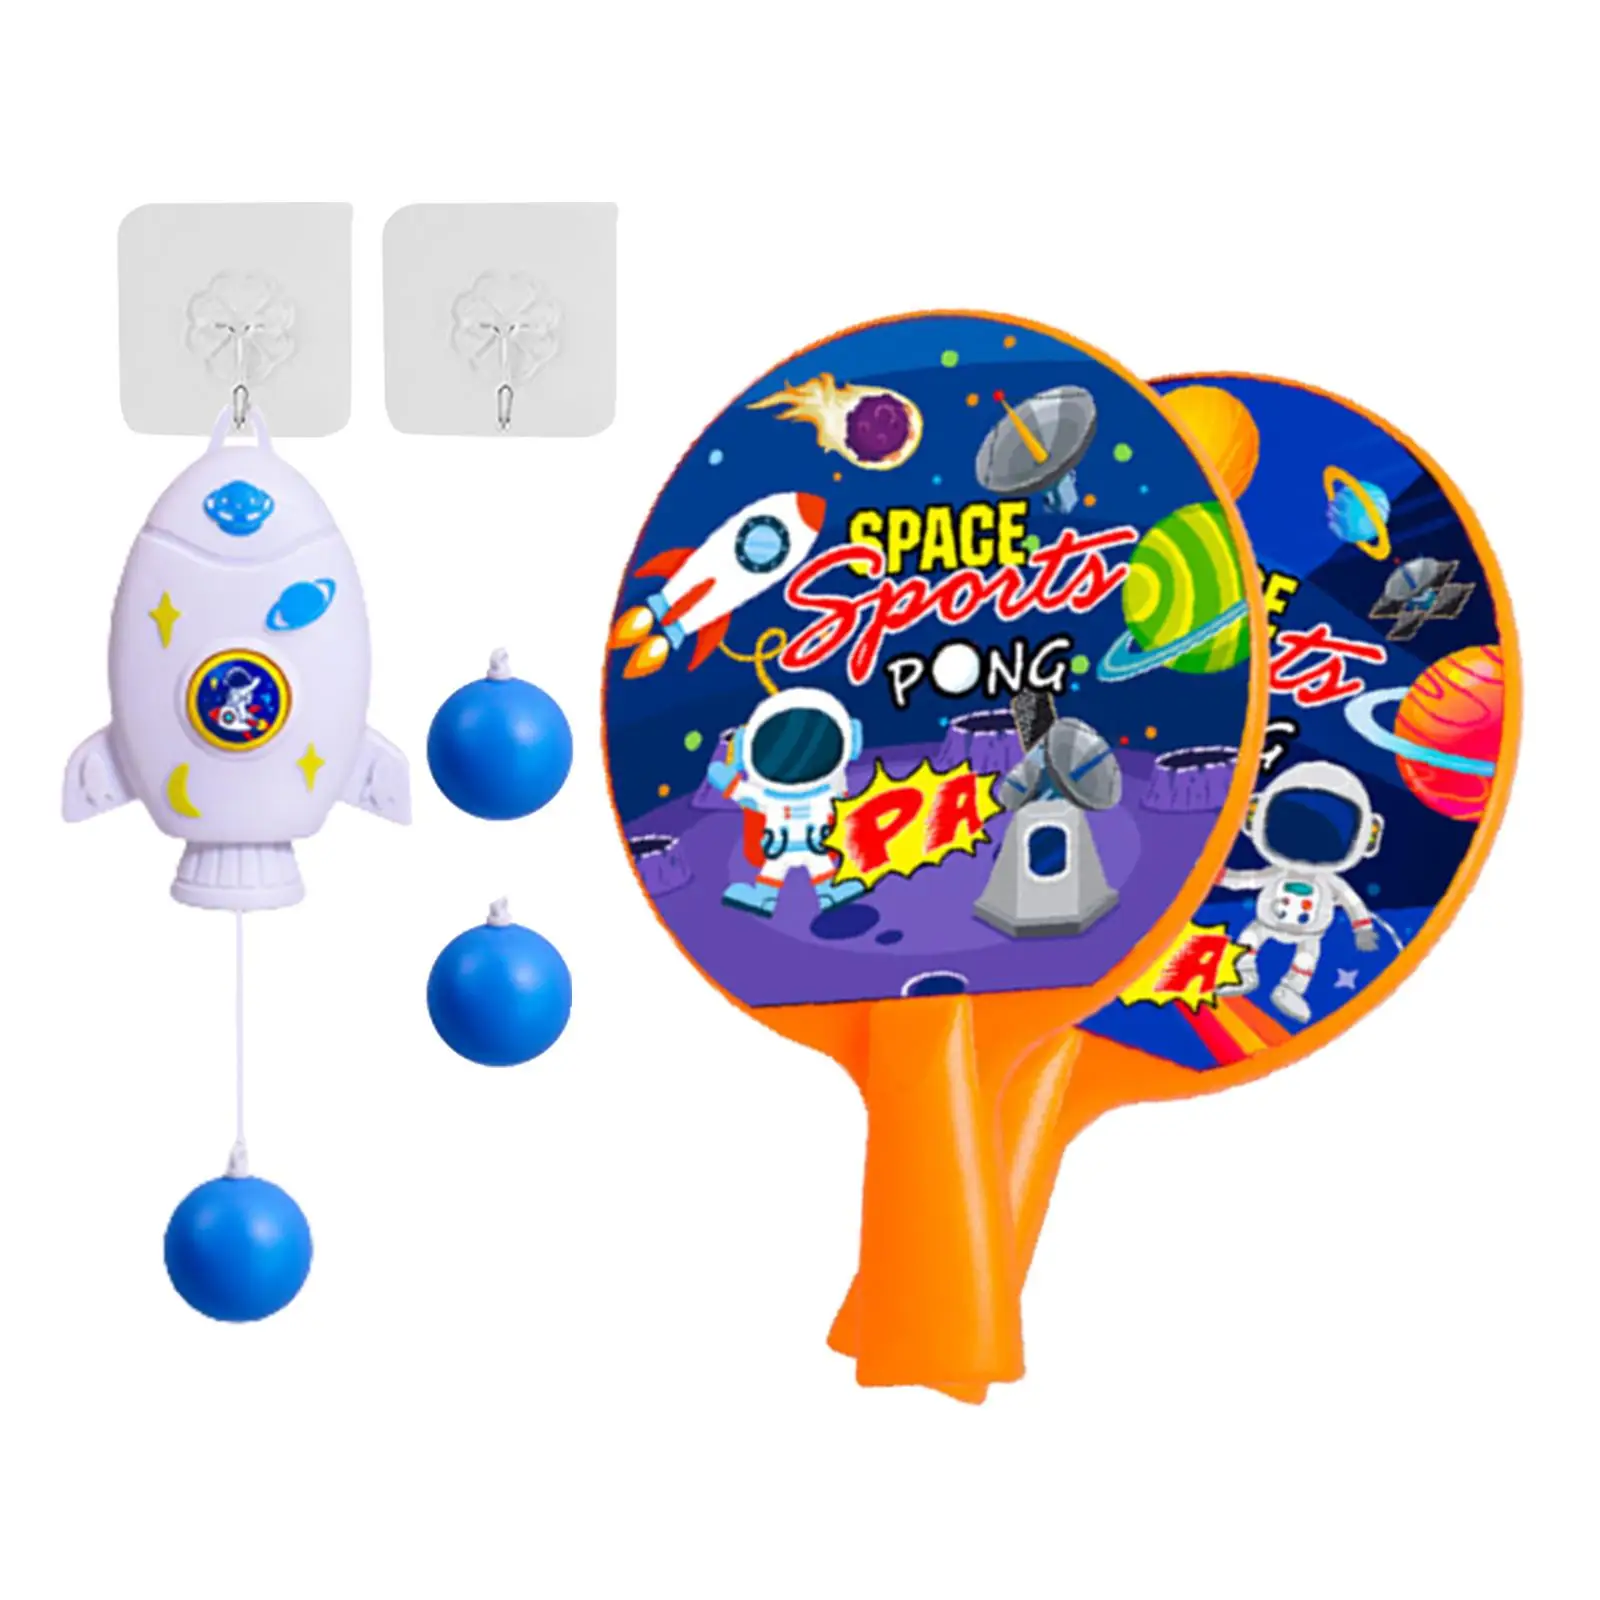 Indoor Hanging Table Tennis Trainer Tennis Practice Equipment Table Tennis Traning Set Interactive Toys No Need Table